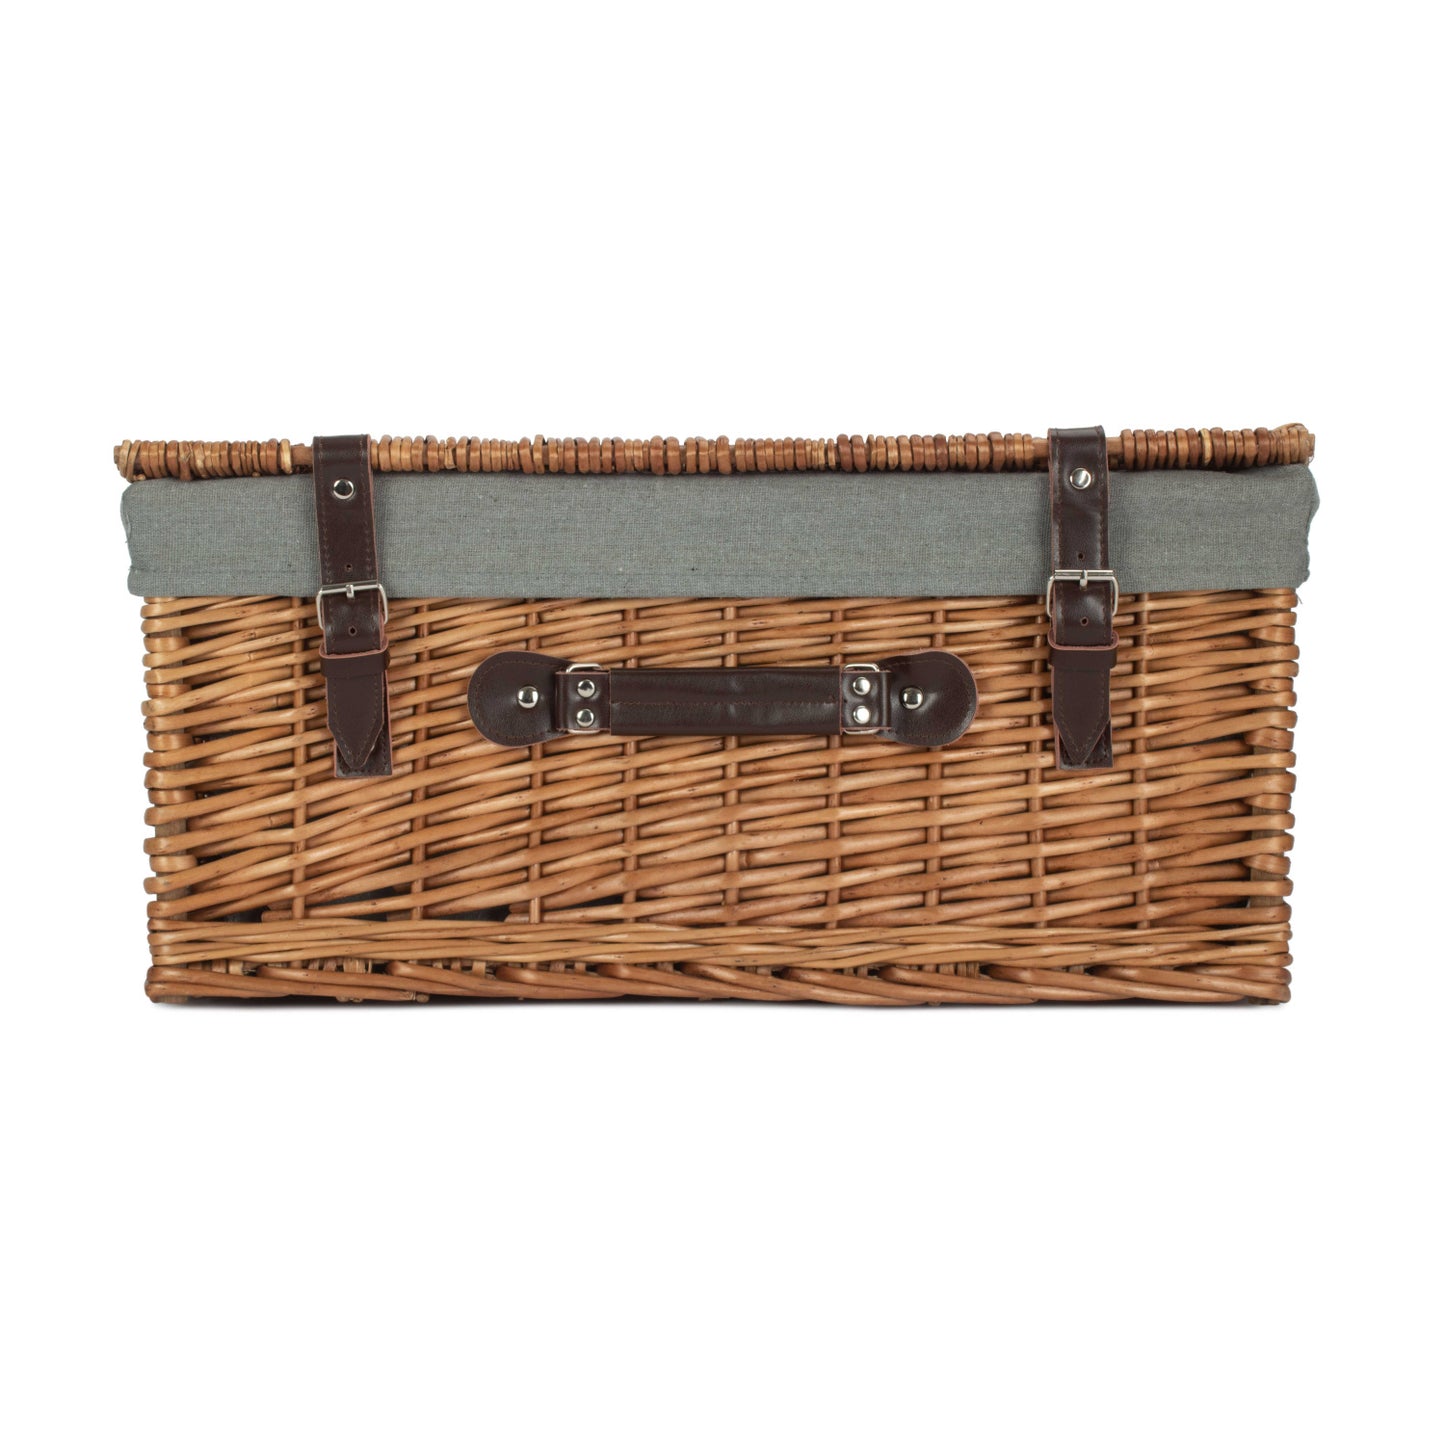 20 Inch Double Steamed Hamper With Grey Sage Lining